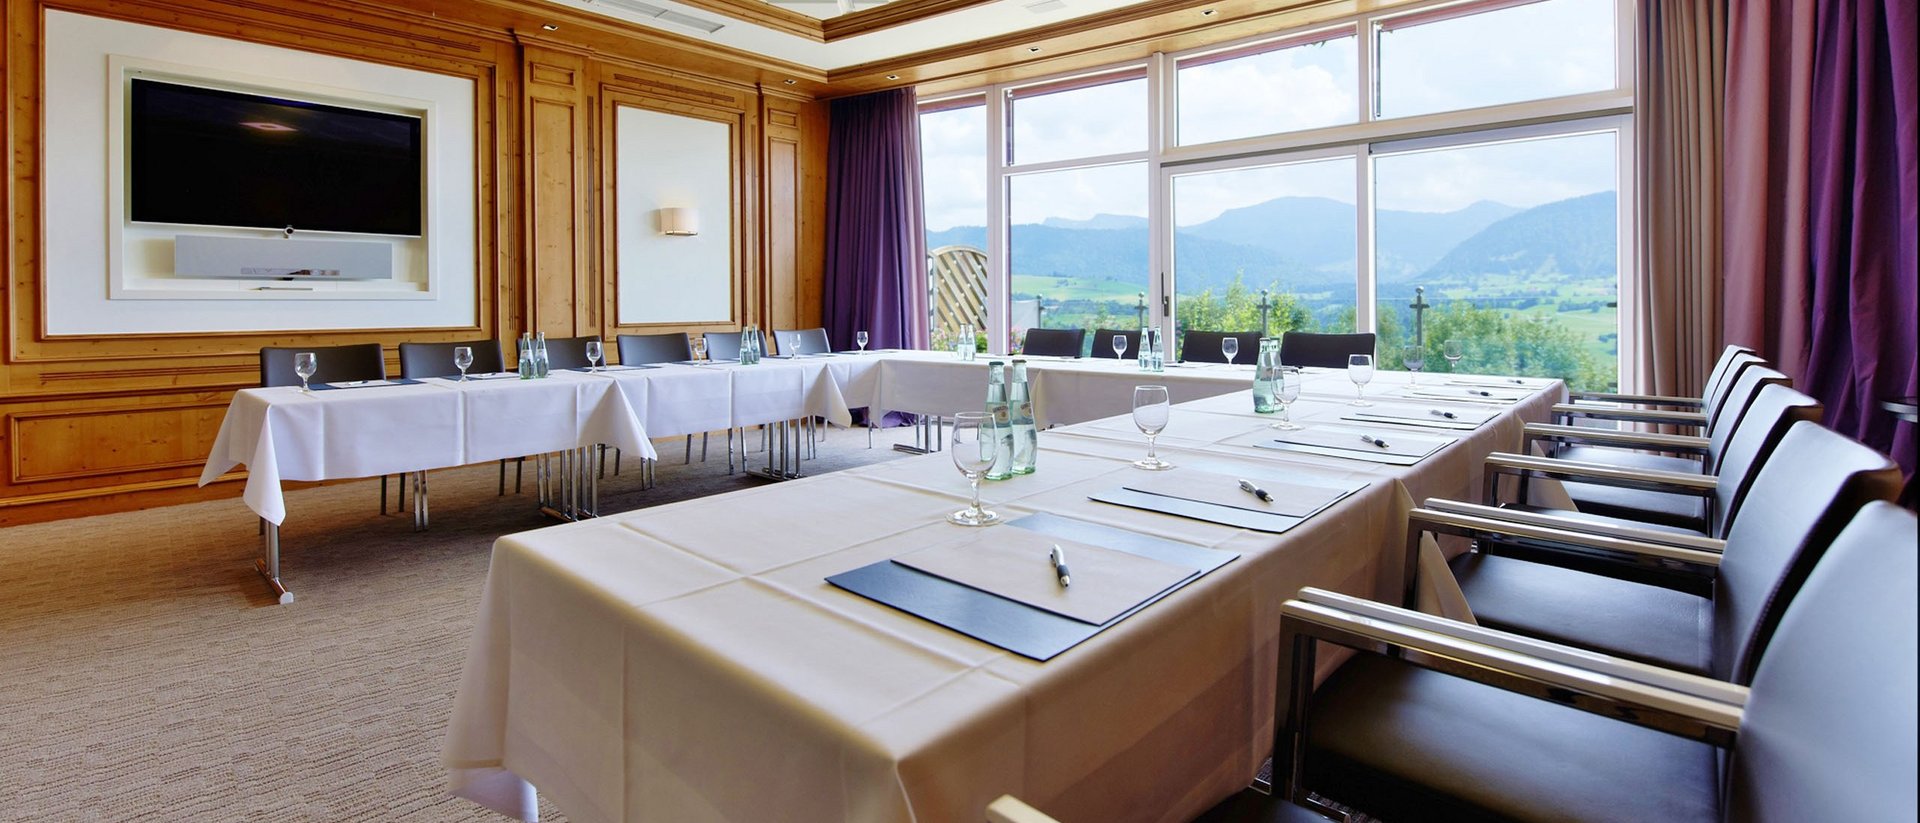 Your conference hotel in Allgäu with mountain view